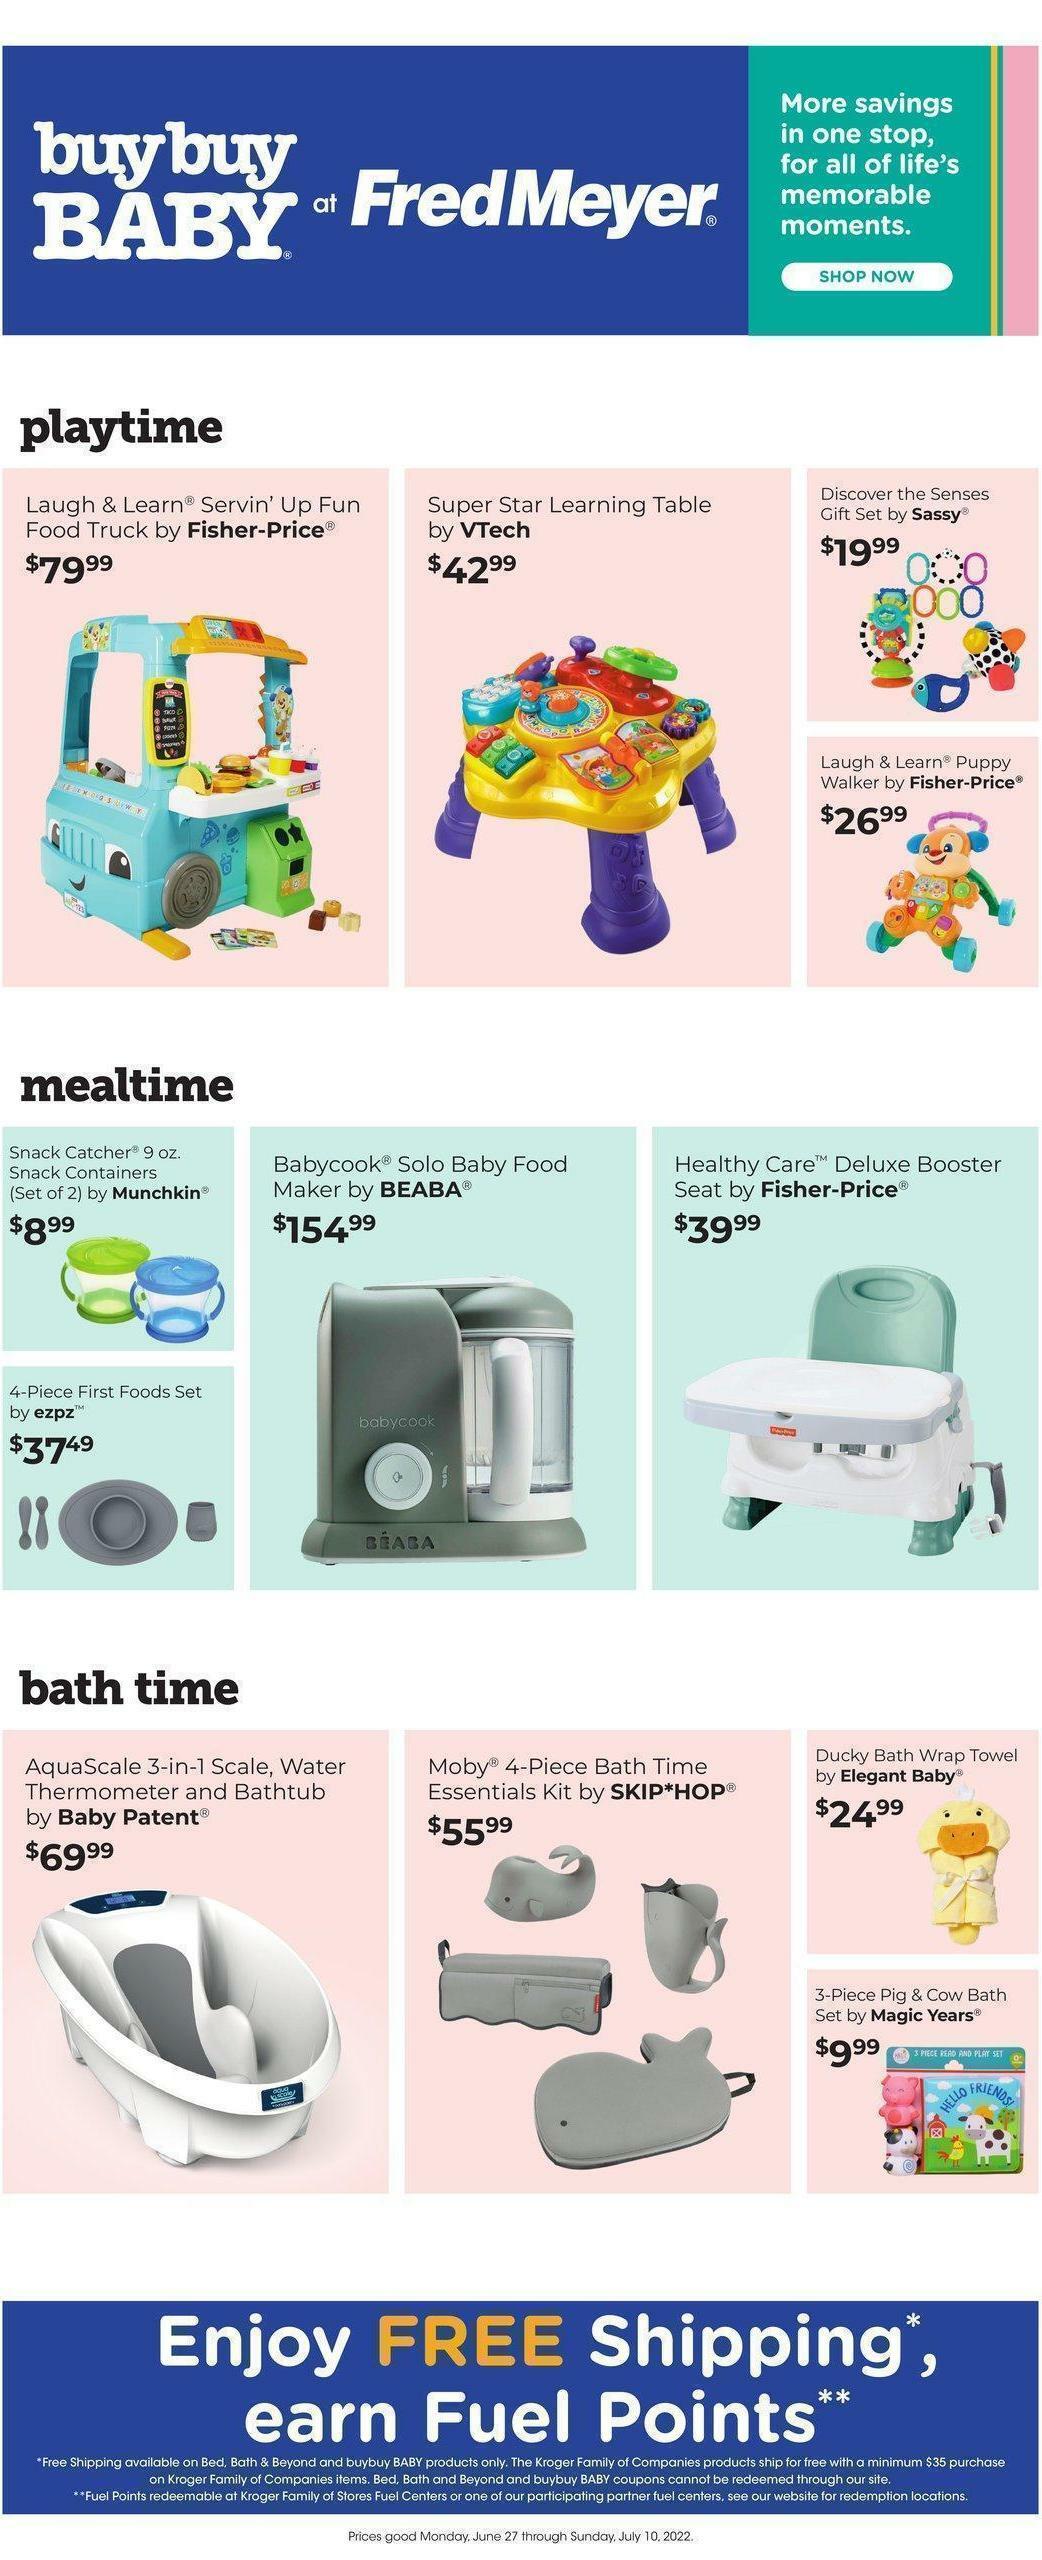 Fred Meyer Bed, Bath & Beyond Weekly Ad from June 27